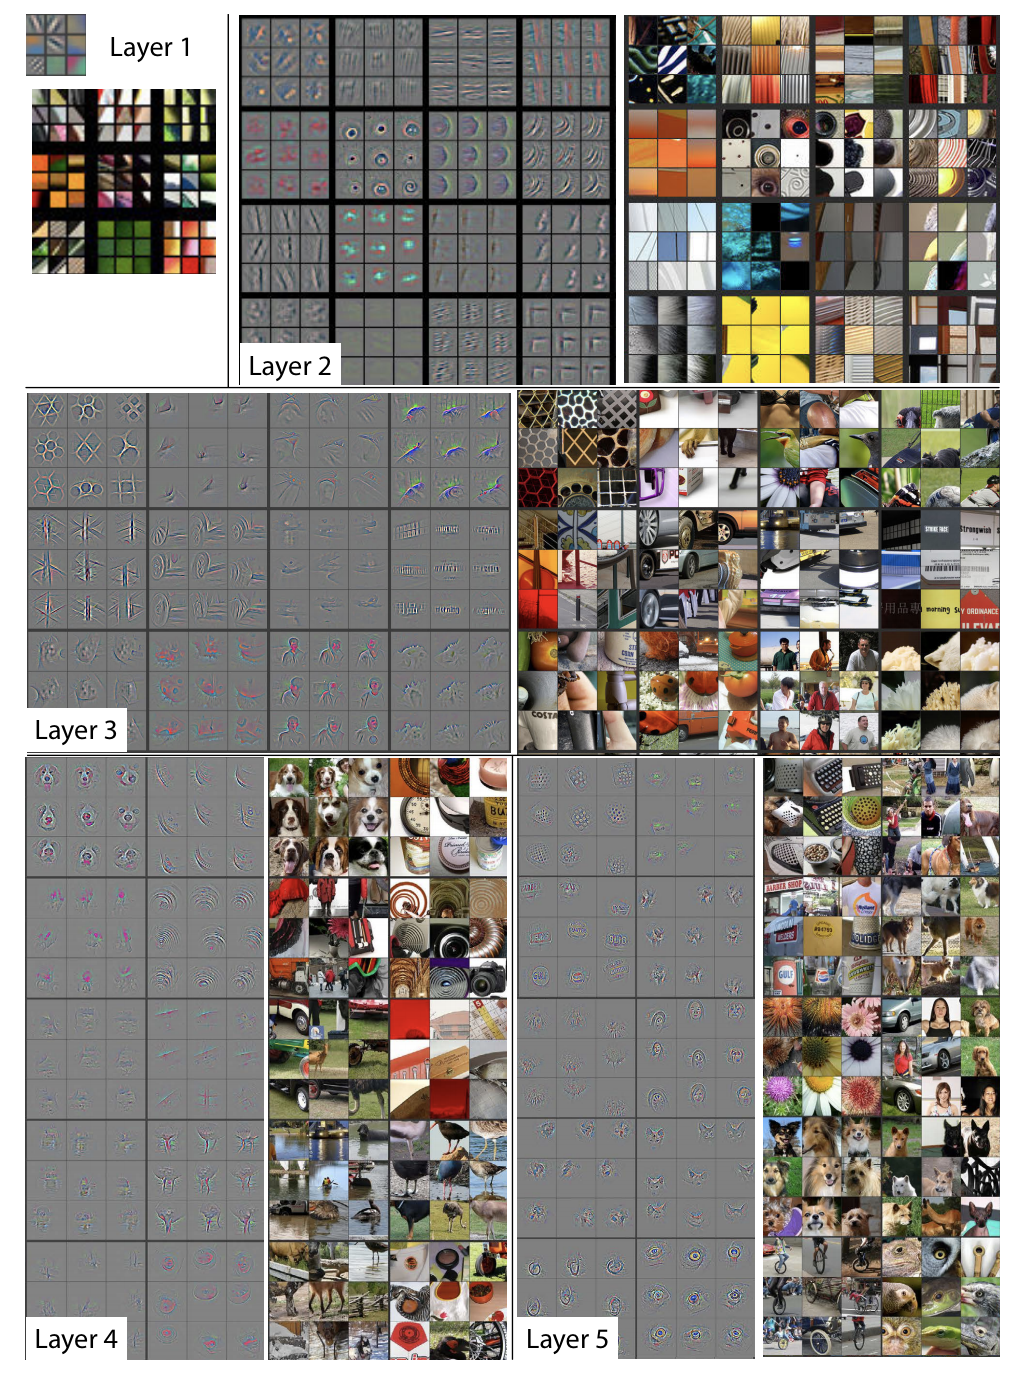 

<a href="https://arxiv.org/pdf/1311.2901.pdf" target="_blank" rel="nofollow noopener">Visualizing and Understanding Convolutional Networks</a>
. You can see how the first few layers capture basic shapes, and the shapes become more and more complex in the later layers.